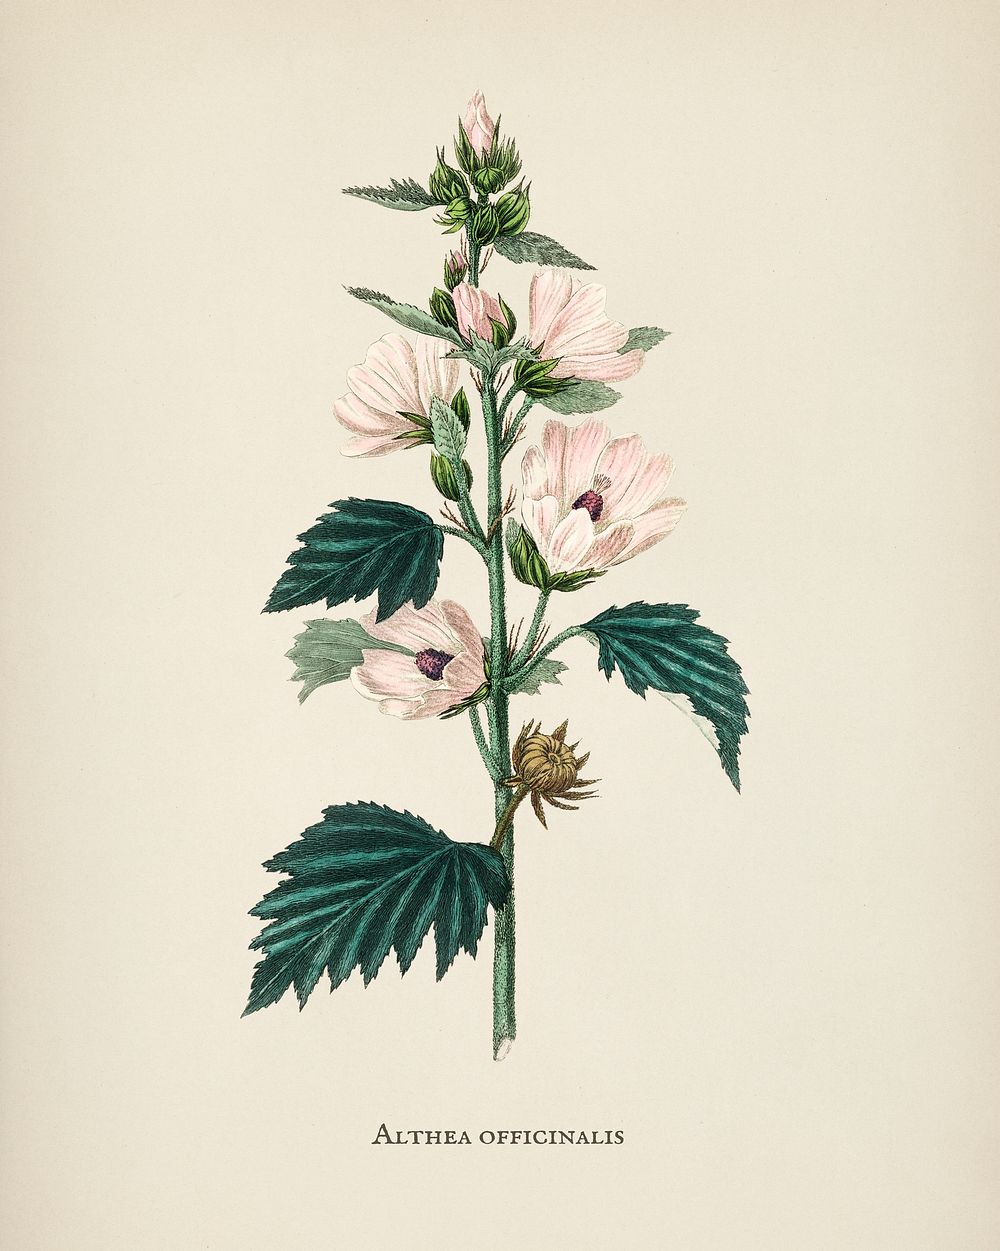 Common marshmallow (Althea officinalis) illustration from Medical Botany (1836) by John Stephenson and James Morss Churchill.